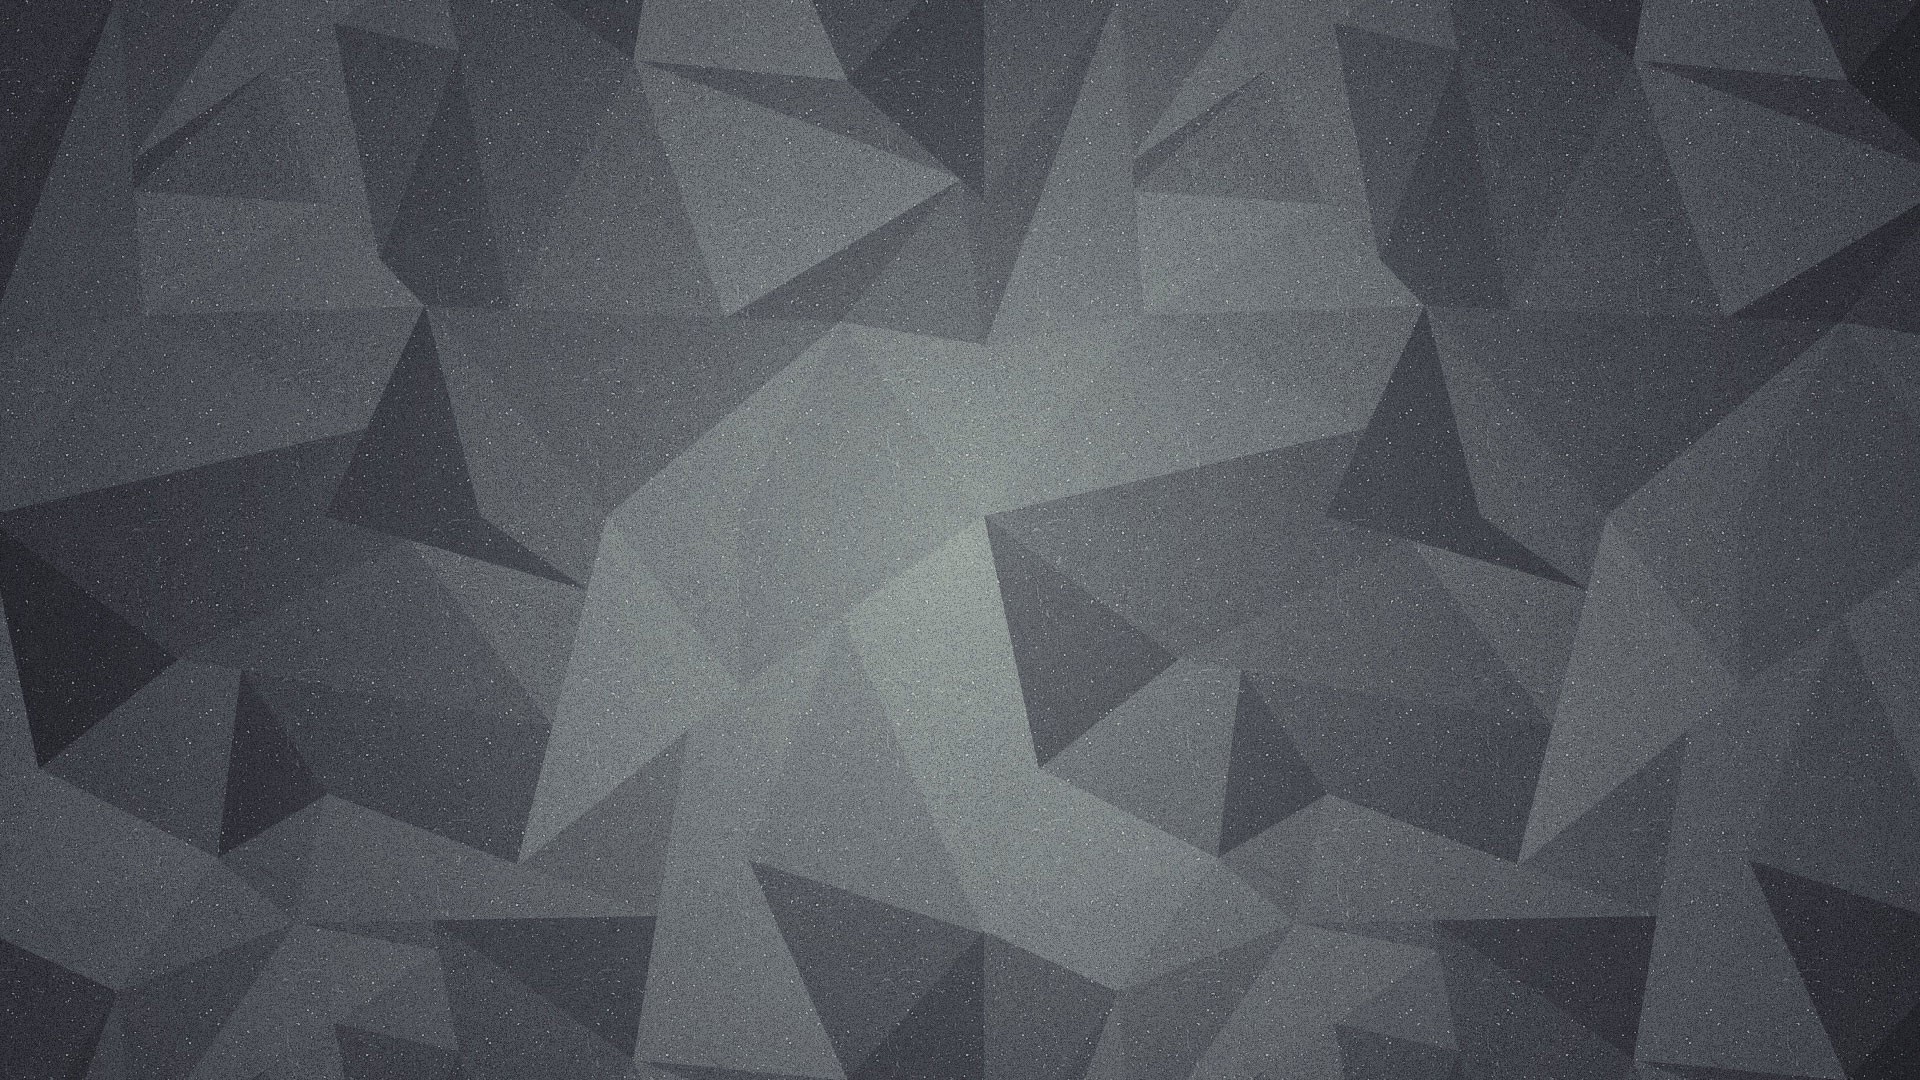 Free Download Grey Polygon Wallpapers Hd 472032 1920x1080 For Images, Photos, Reviews